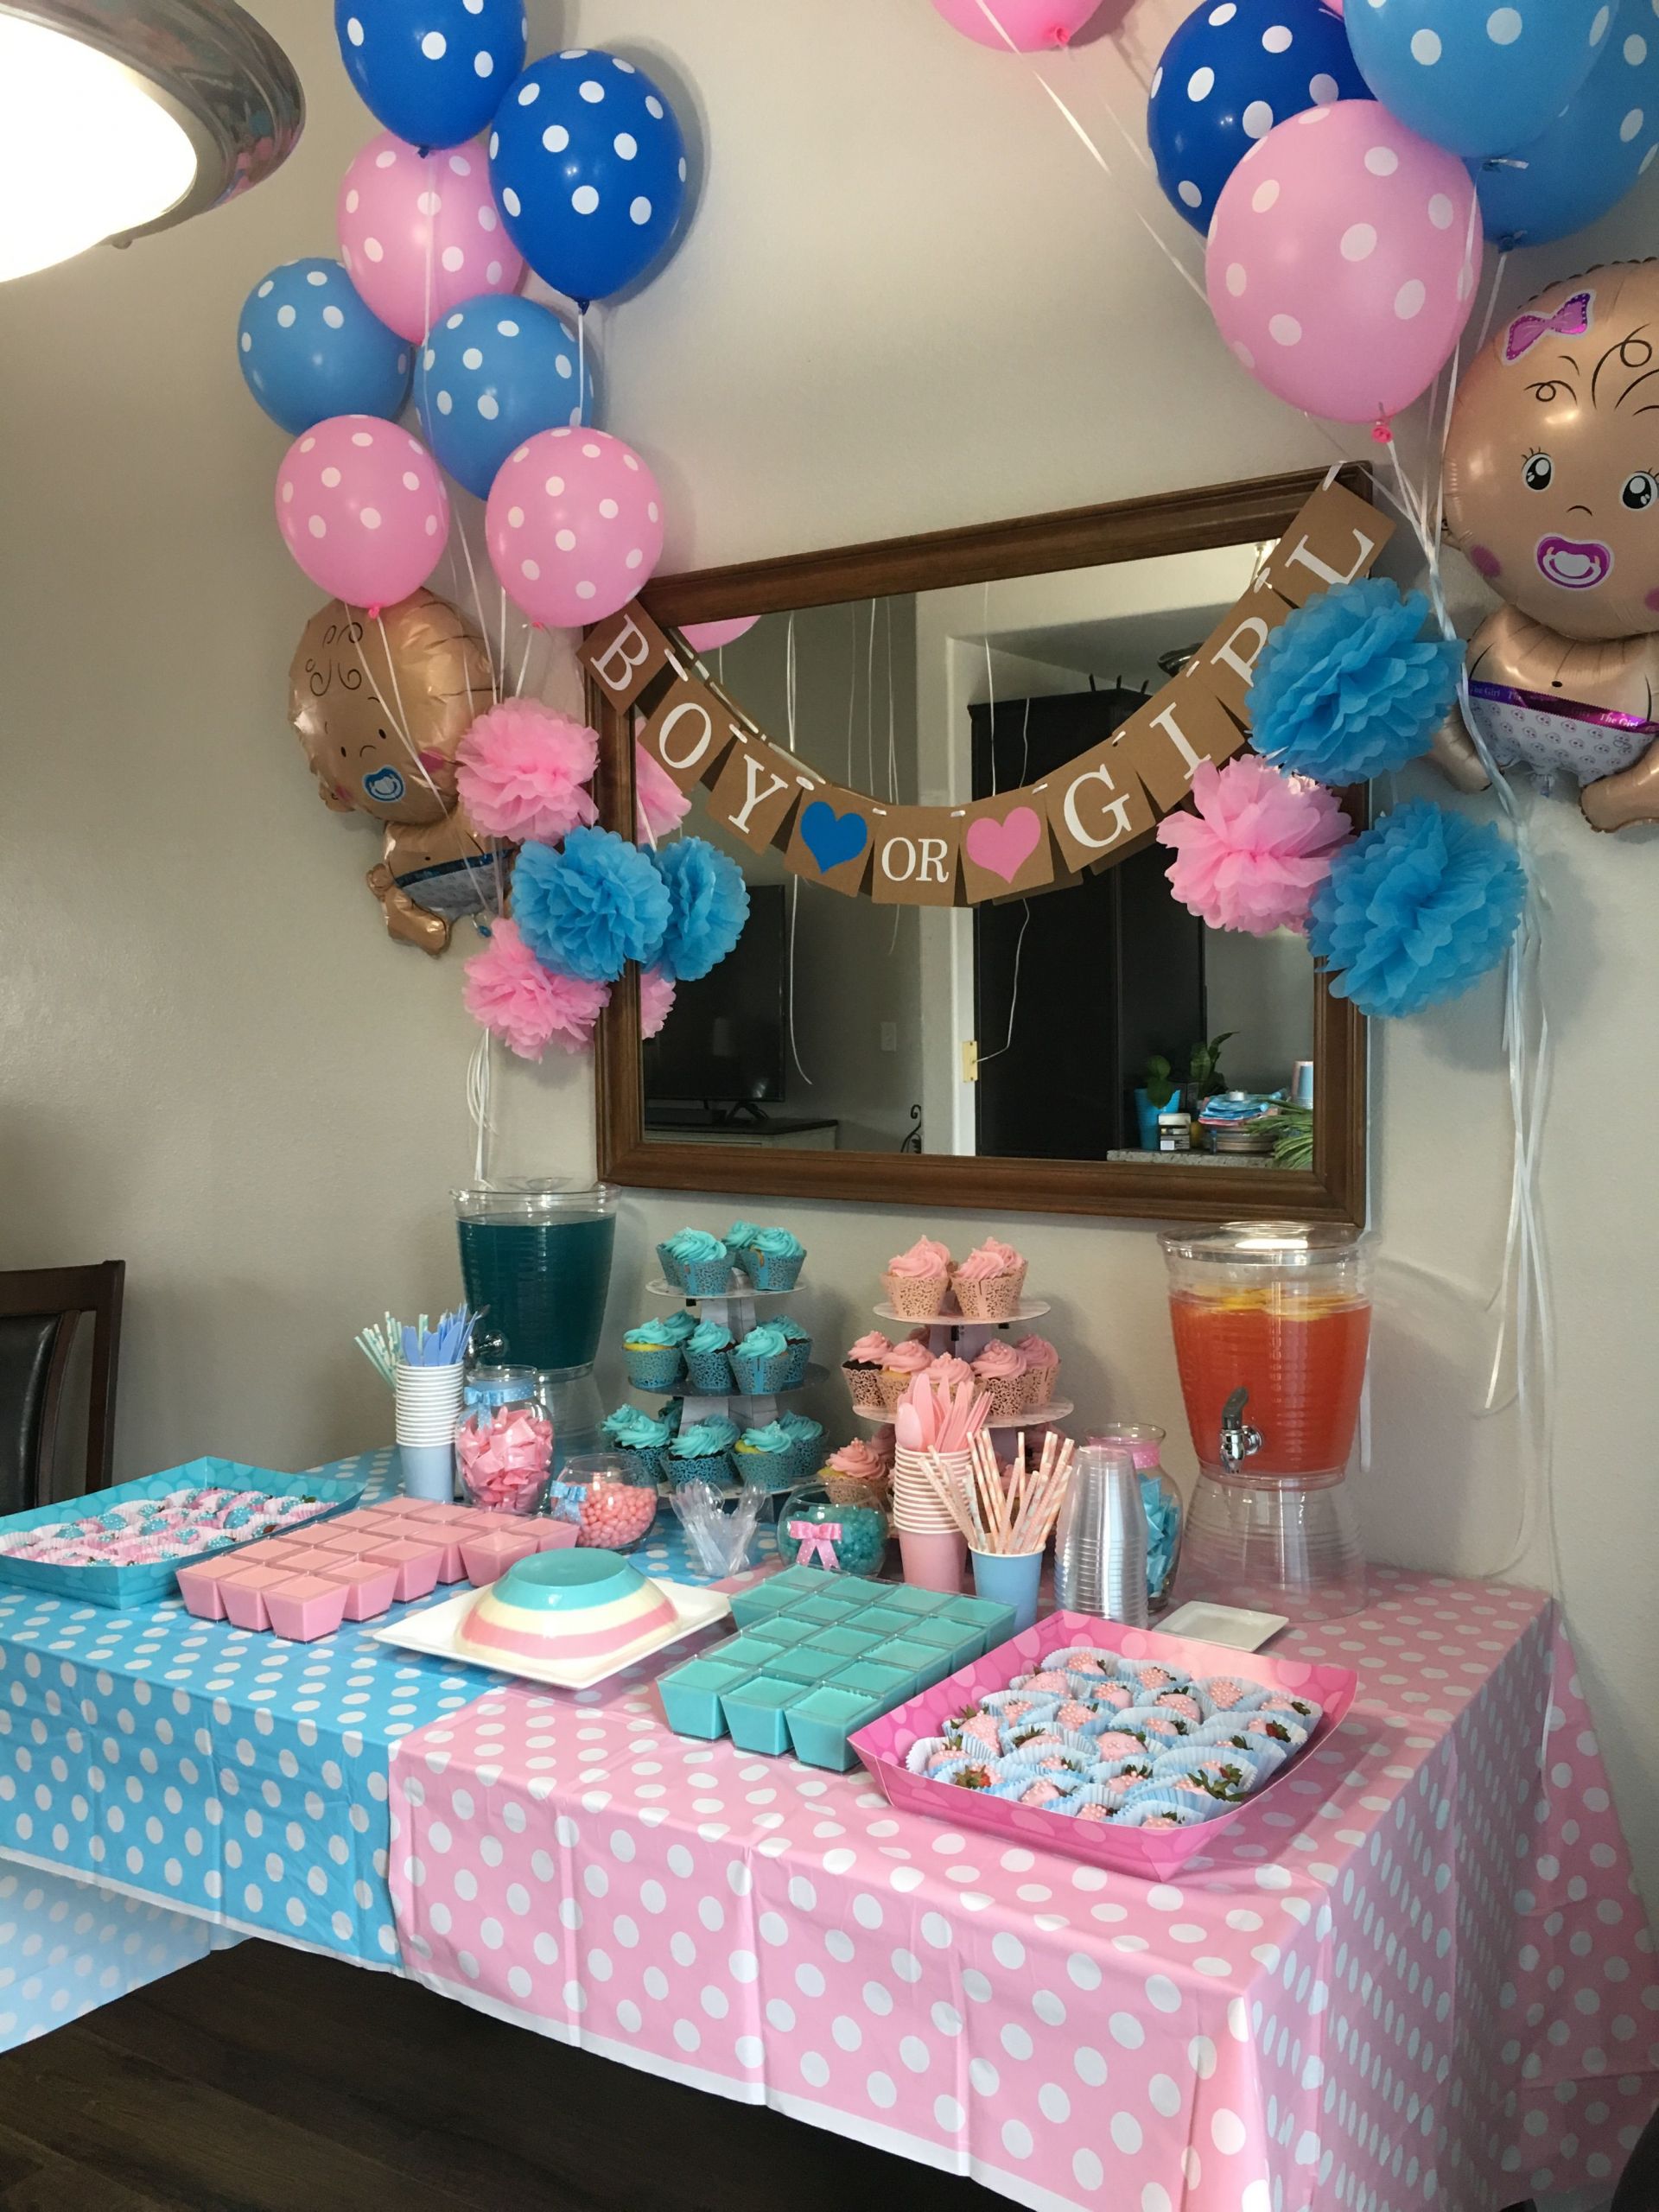 Gender Reveal Party Ideas Party City
 Pin on Gender reveal party